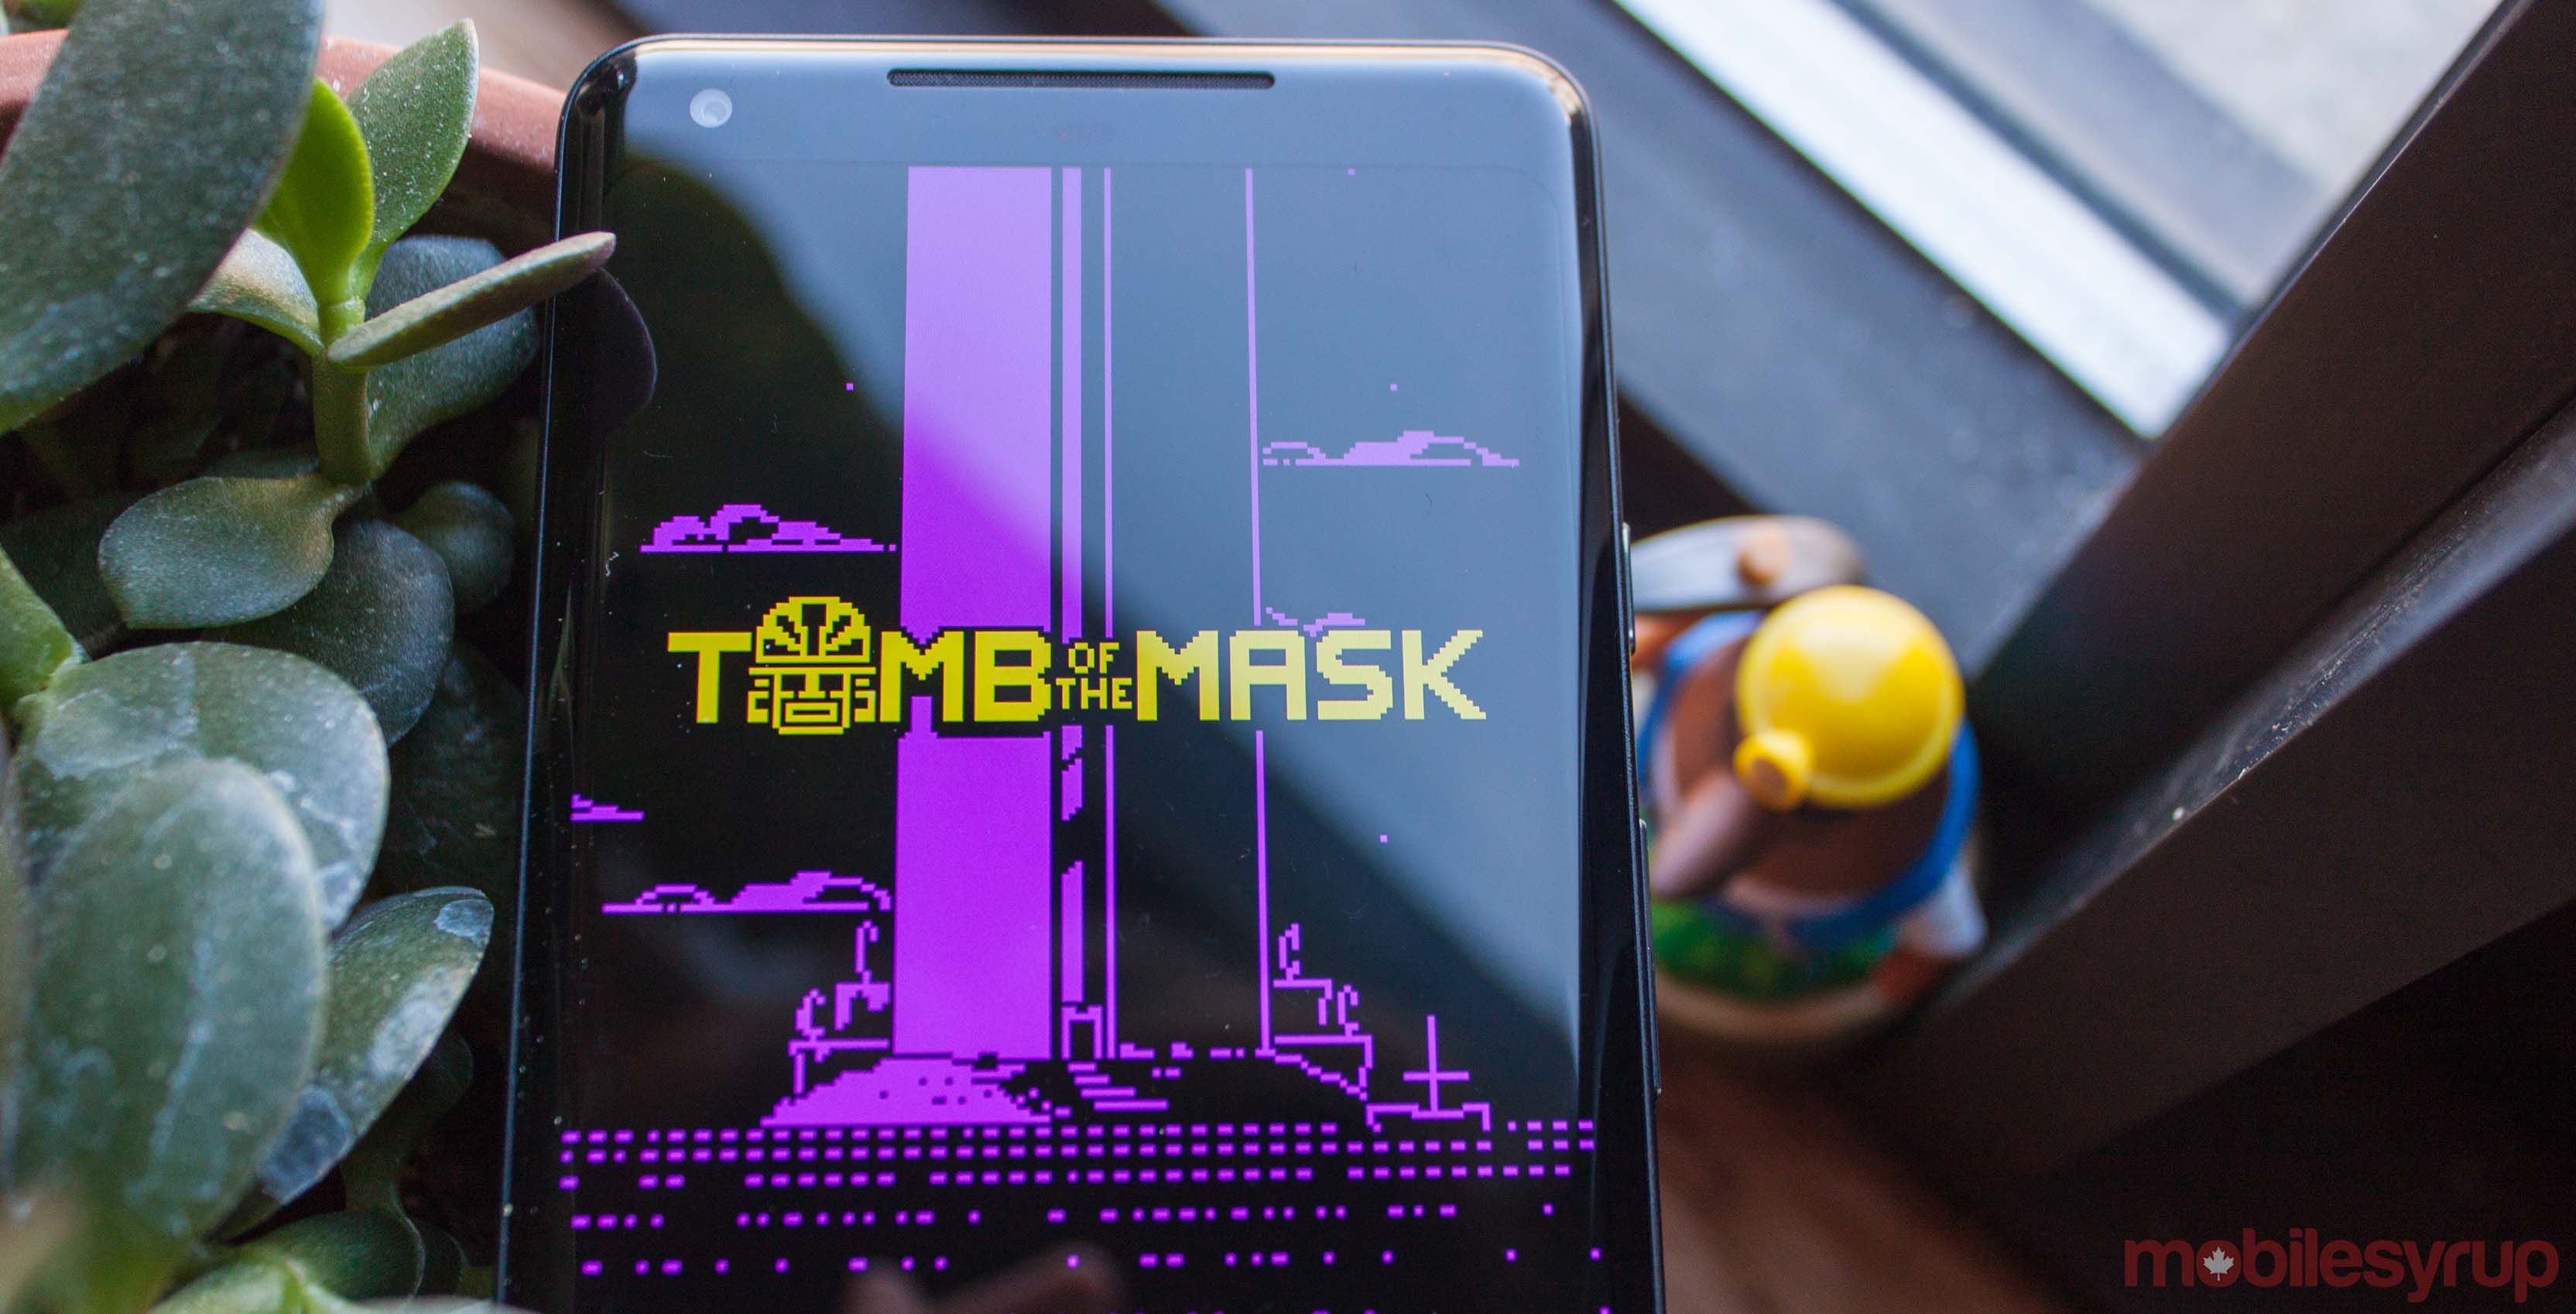 Tomb of the Mask title screen